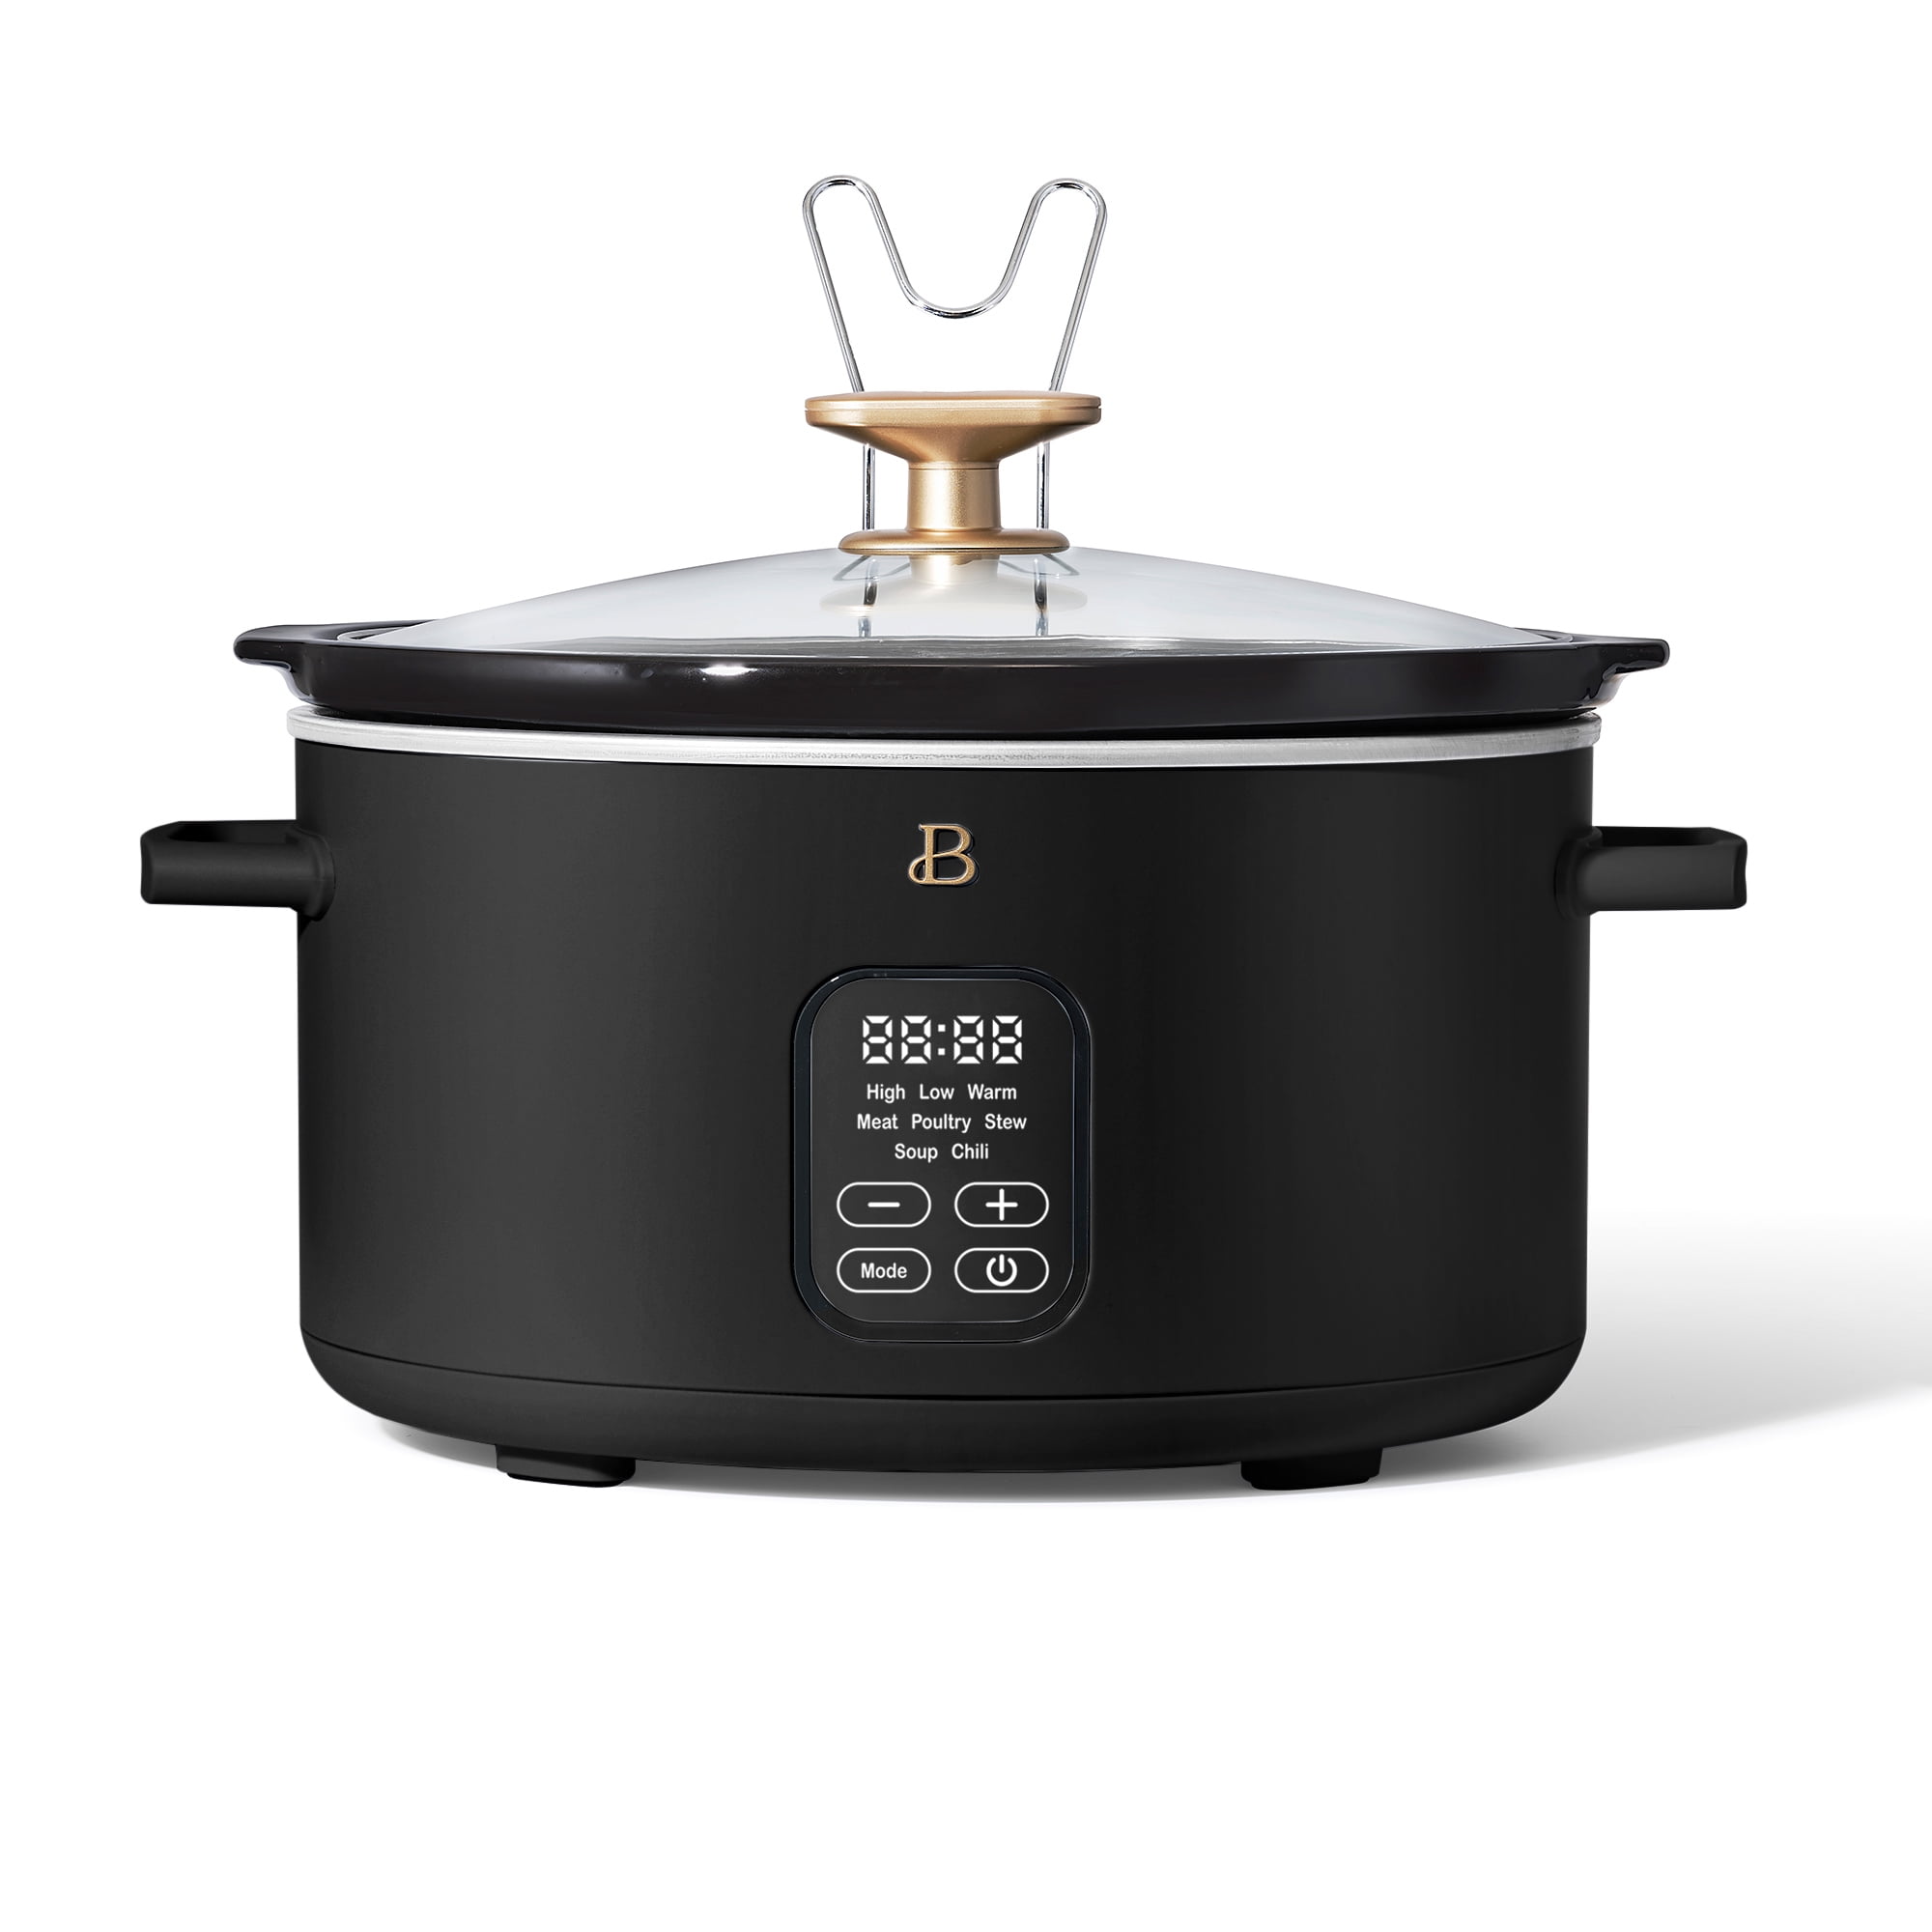 Beautiful 6 Qt Programmable Slow Cooker, Oyster Grey by Drew